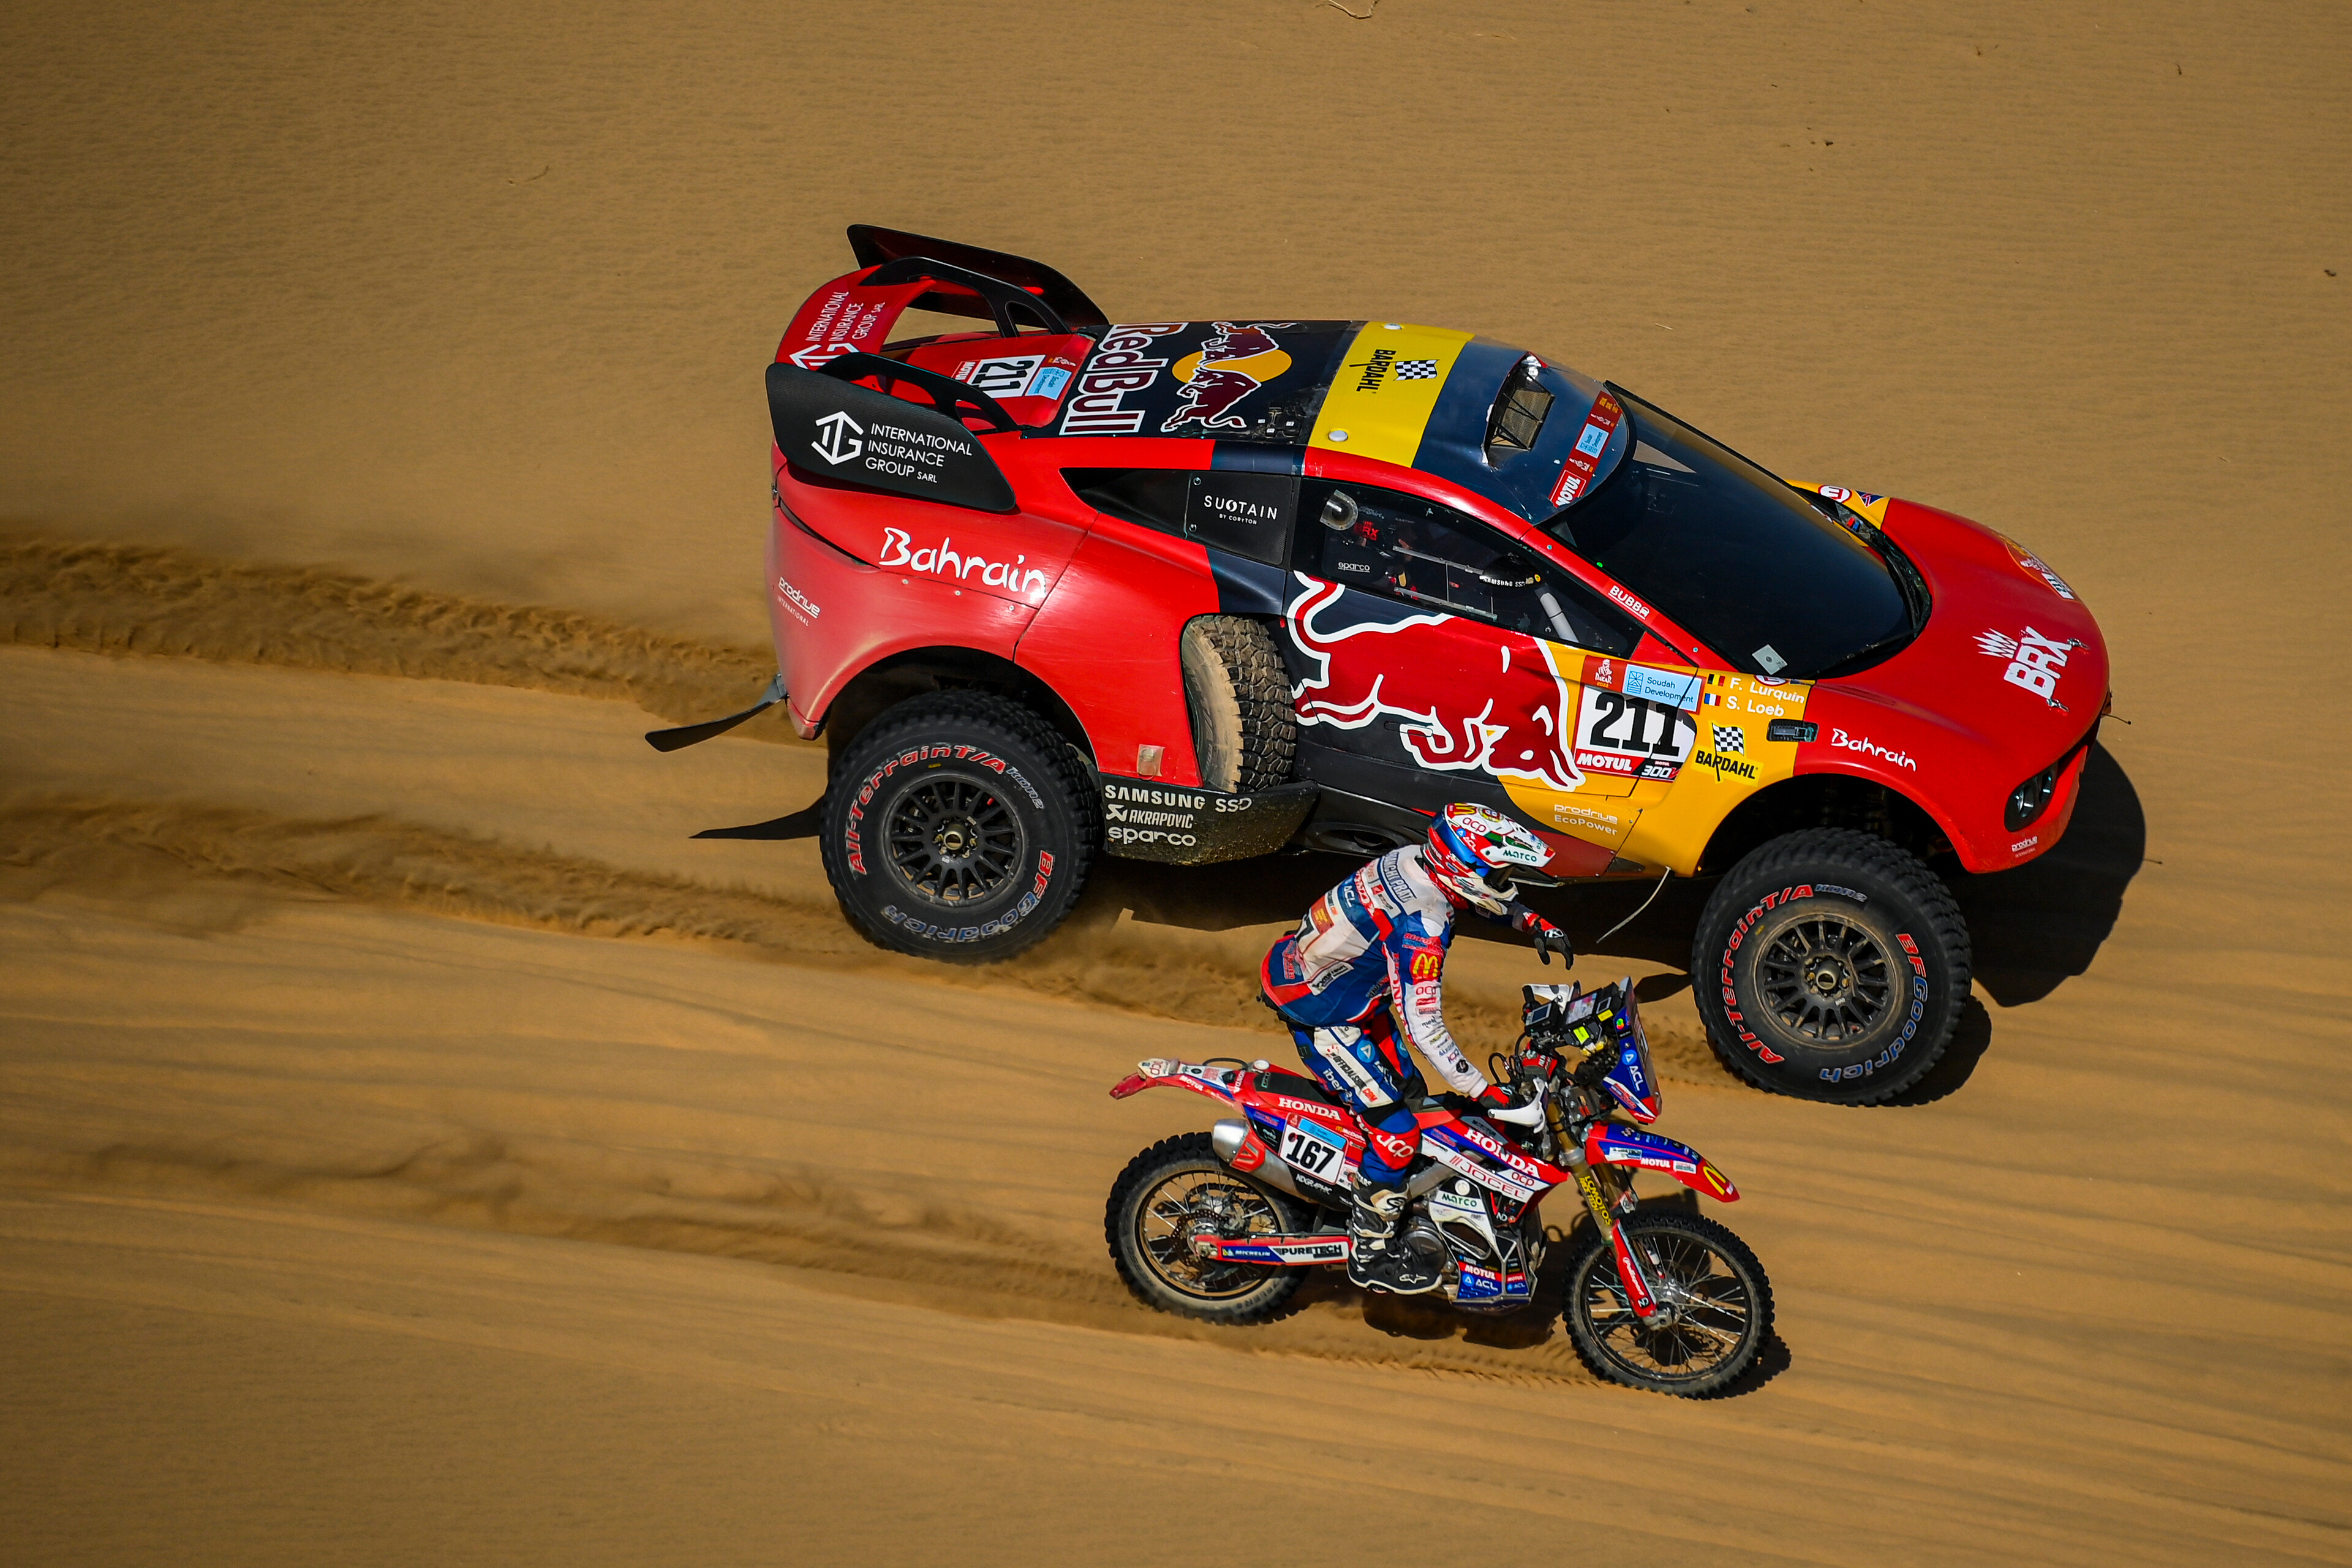 The 2023 Dakar Rally will feature more than 365 cars and 1,000 participants in 7 categories